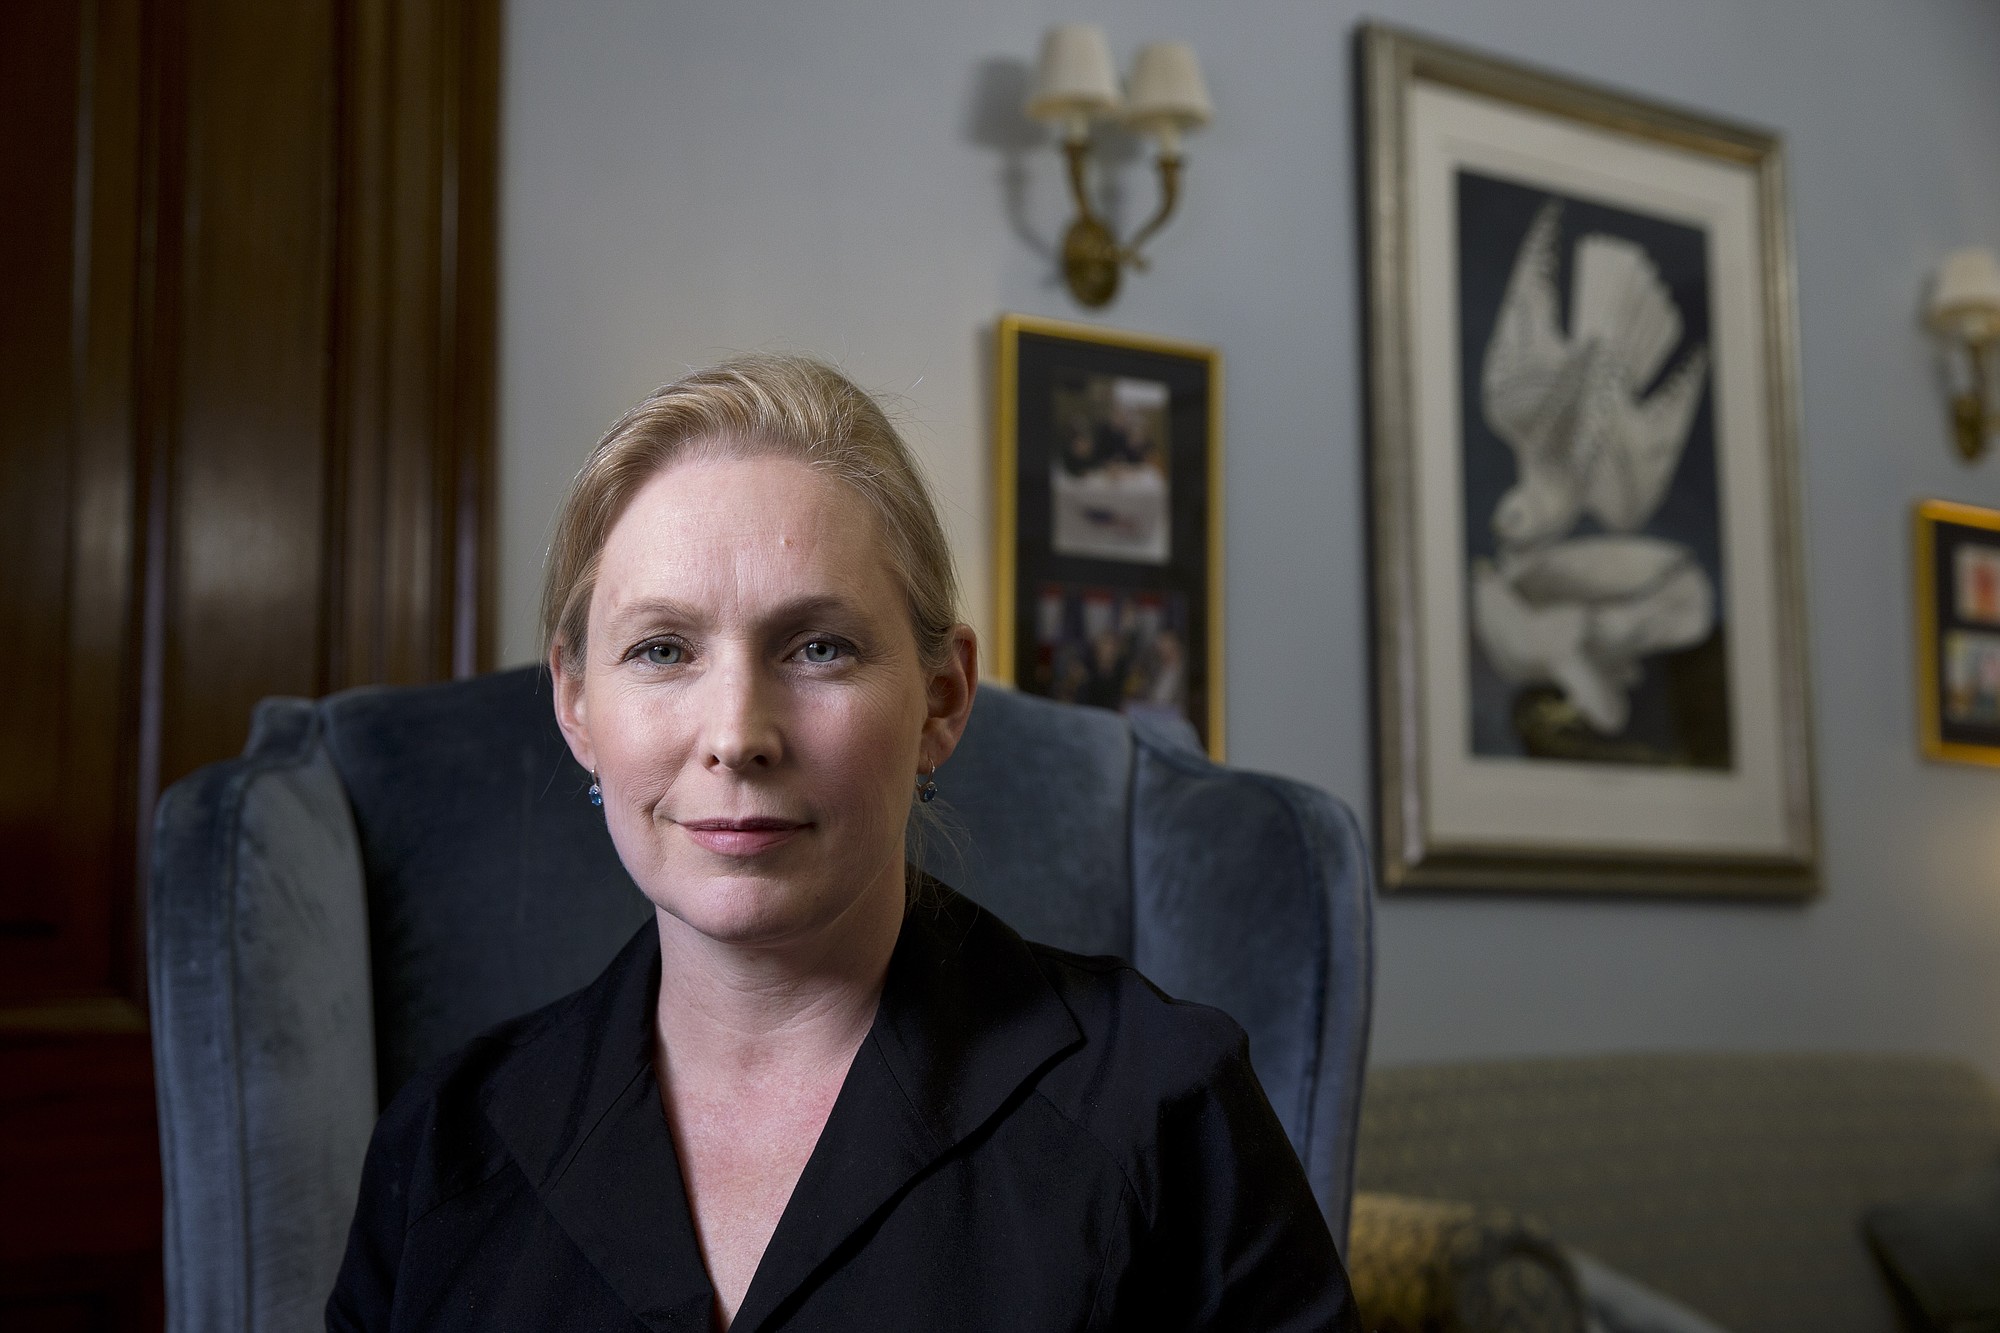 Sen. Kirsten Gillibrand, D-N.Y., poses for a portrait after speaking about military sexual assaults, during an interview in her office on Capitol Hill in Washington.   The spouses of service members and civilian women who live or work near military facilities are especially vulnerable to being sexually assaulted, Sen. Kirsten Gillibrand, D-N.Y.